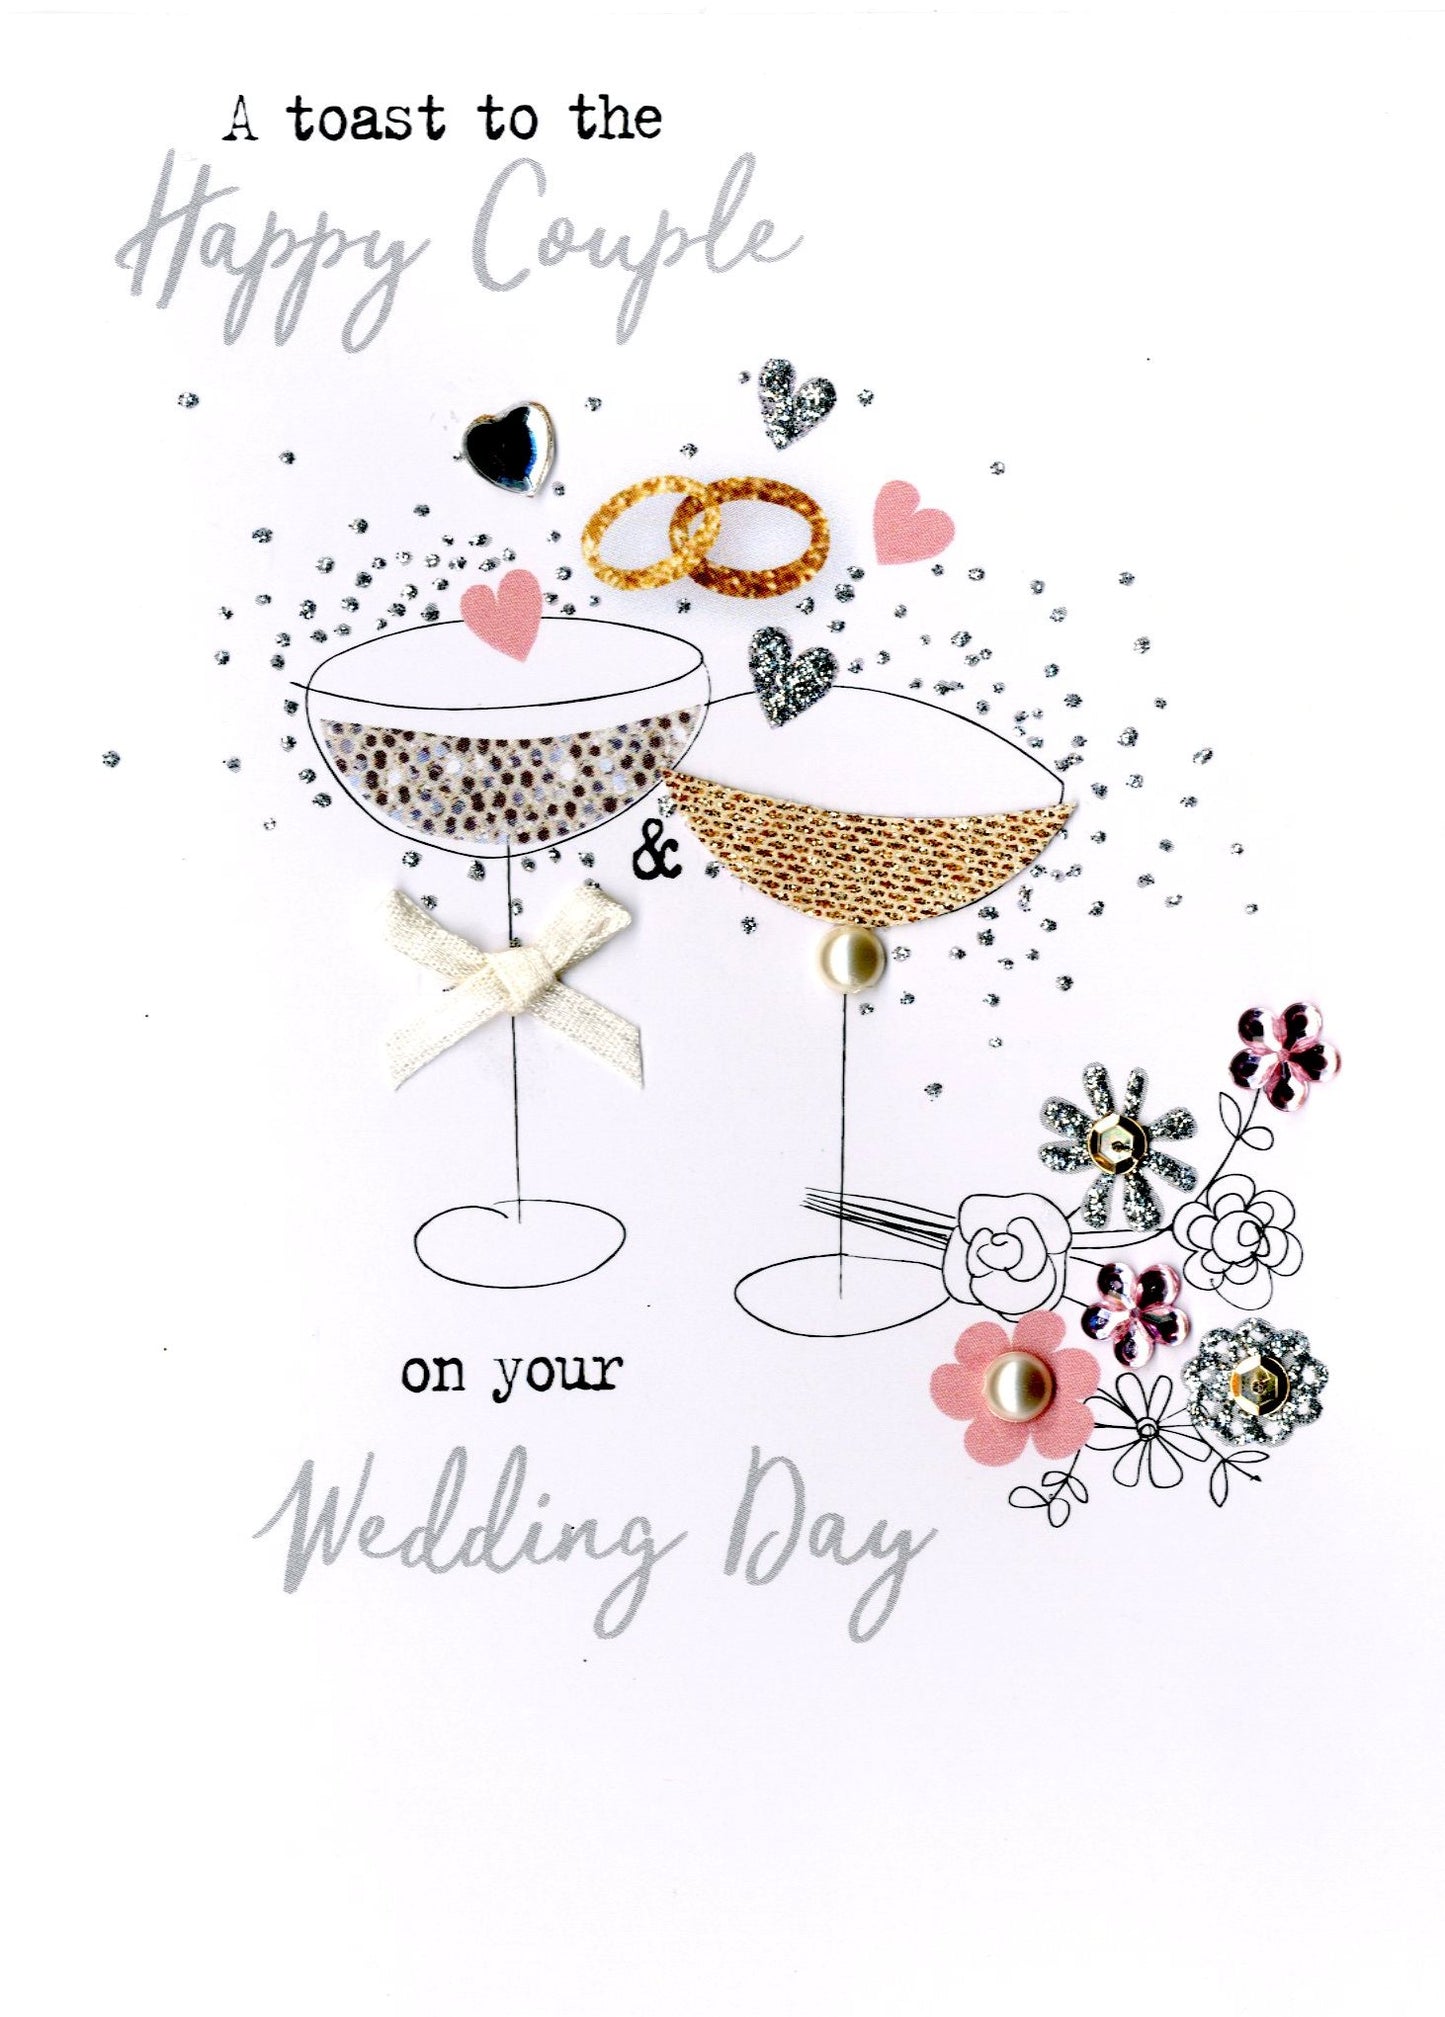 Happy Couple Wedding Day Irresistible Greeting Card